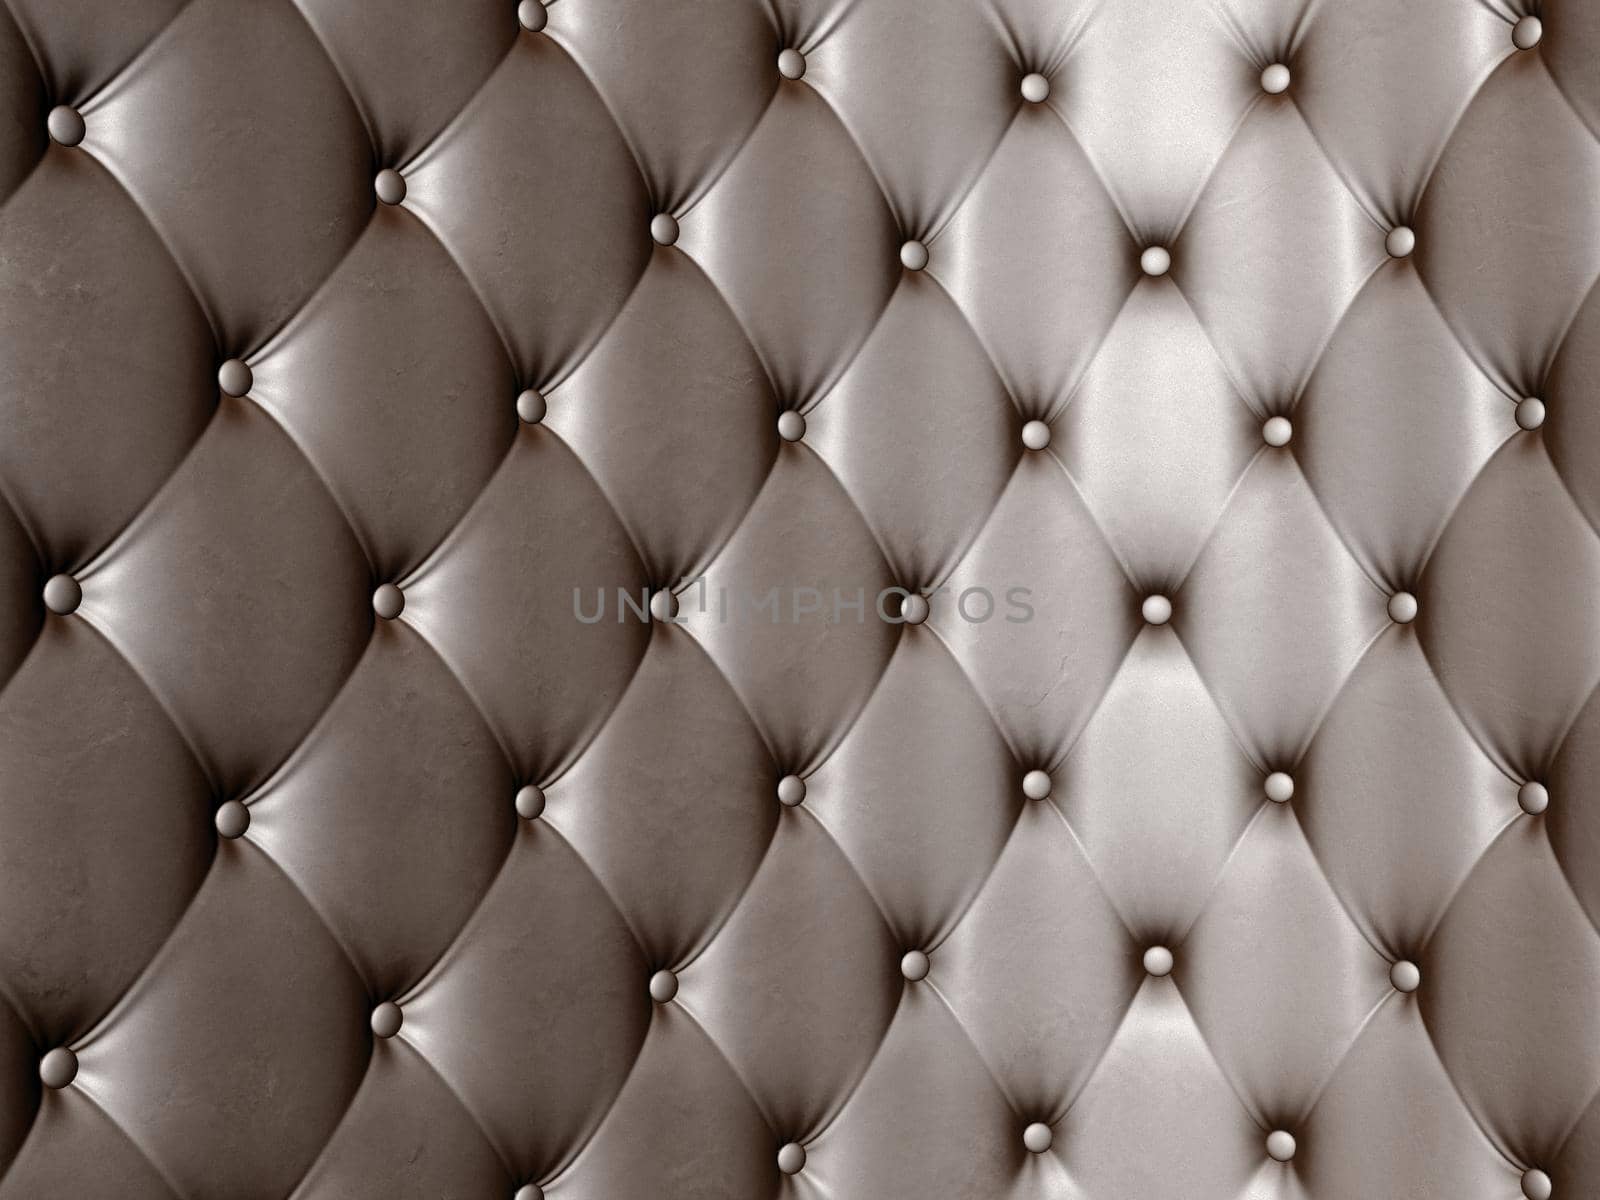 dark and shiny leather upholstery 3d render